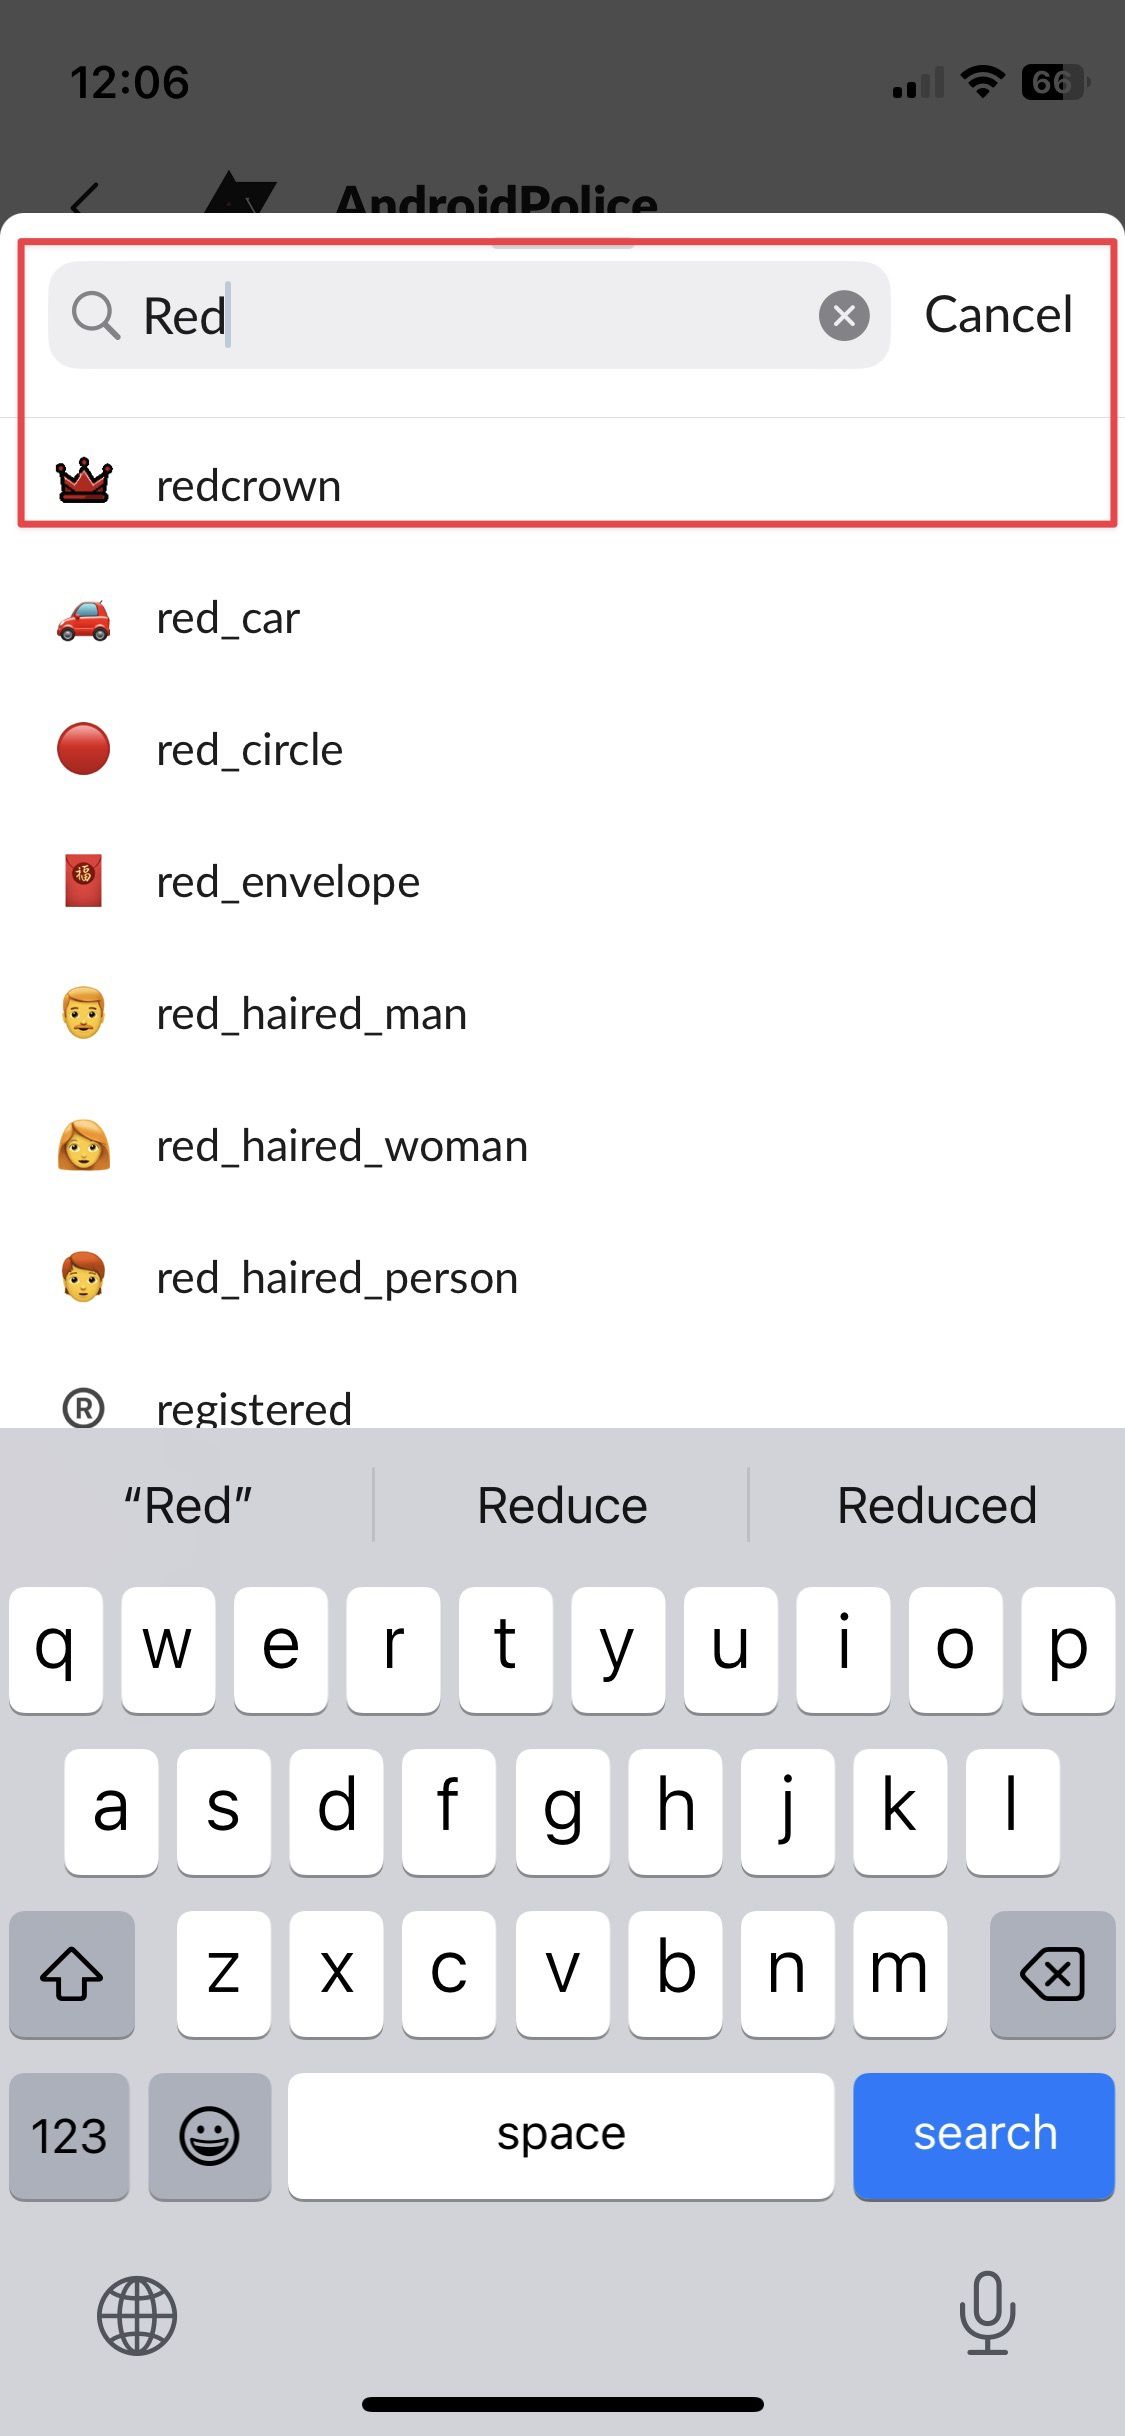 A screenshot displaying a search box located at the top of the page, with the word 'Red' entered into the search field.